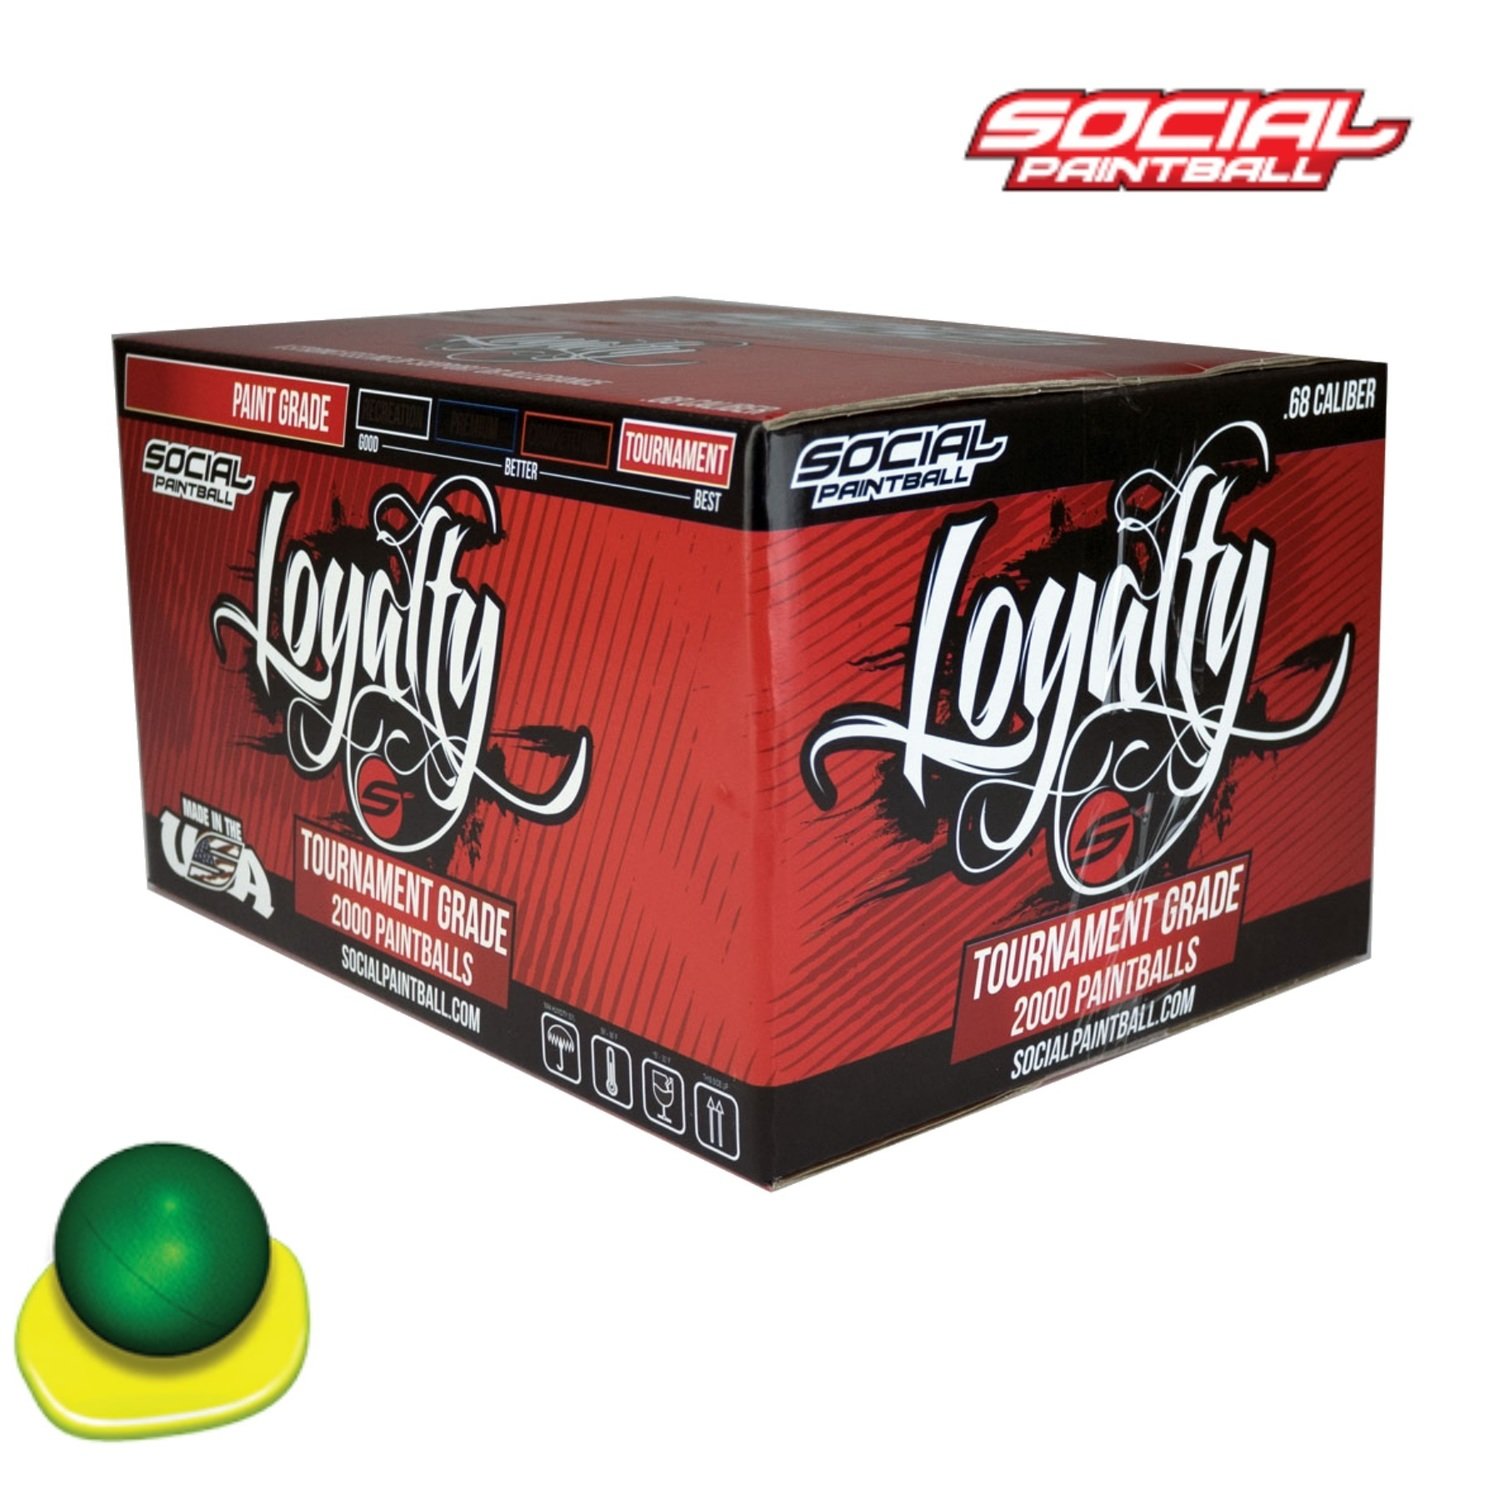 Social Paintball Loyalty Pro .68 cal Paintballs - Case of 2000 Rds - Pine Shell - PRO Green Fill